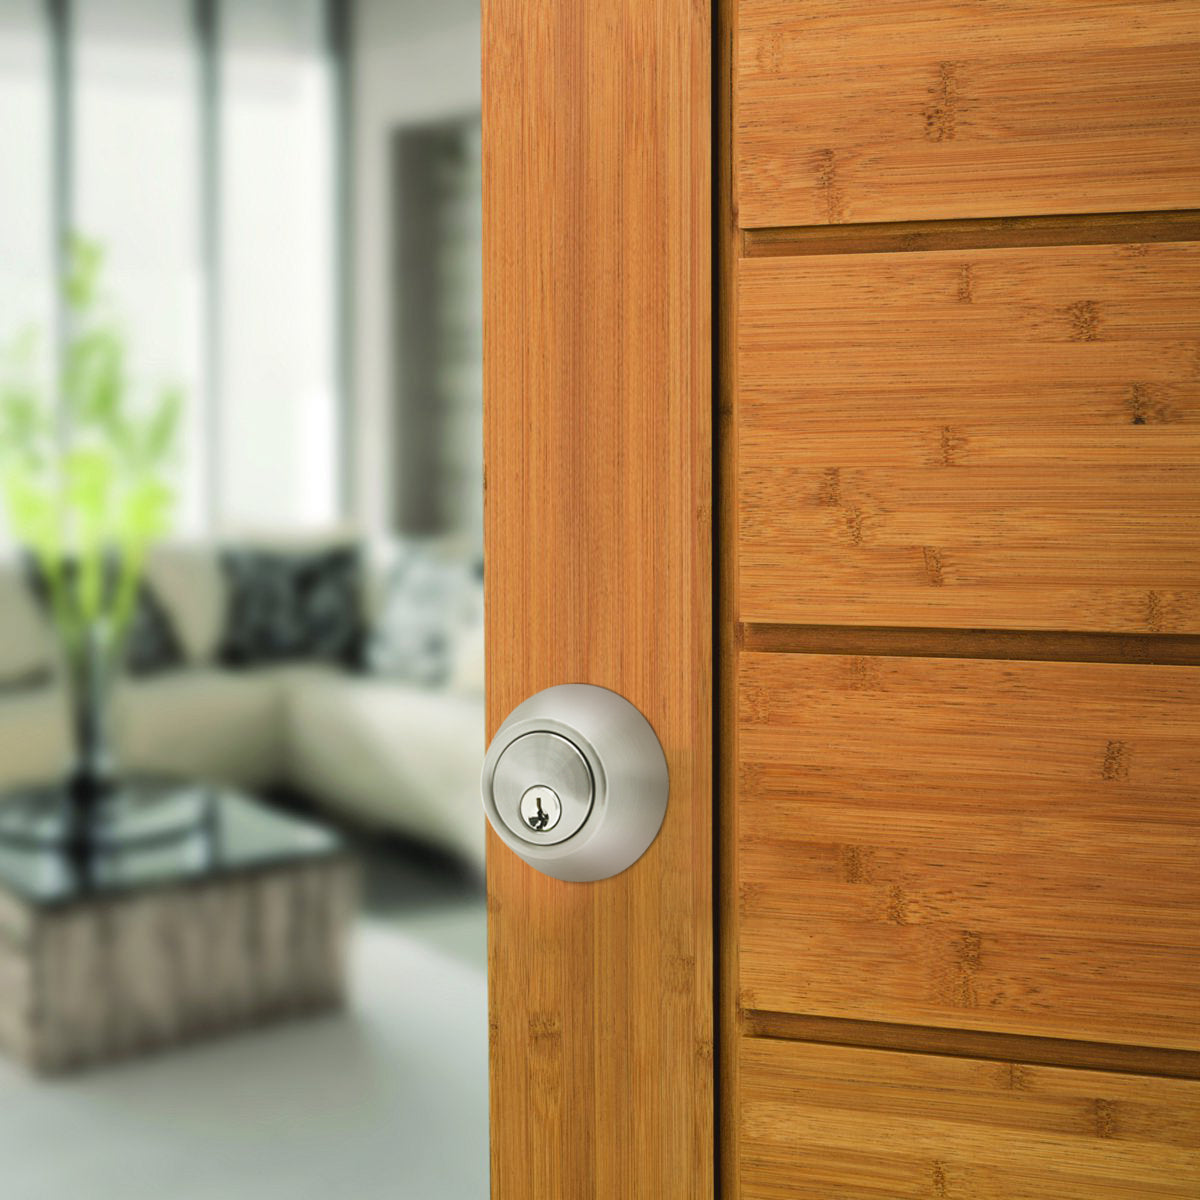 Double Cylinder Deadbolts with Key on Both Side, Keyed Entry Door Lock Satin Nickel Finish DLD102SN